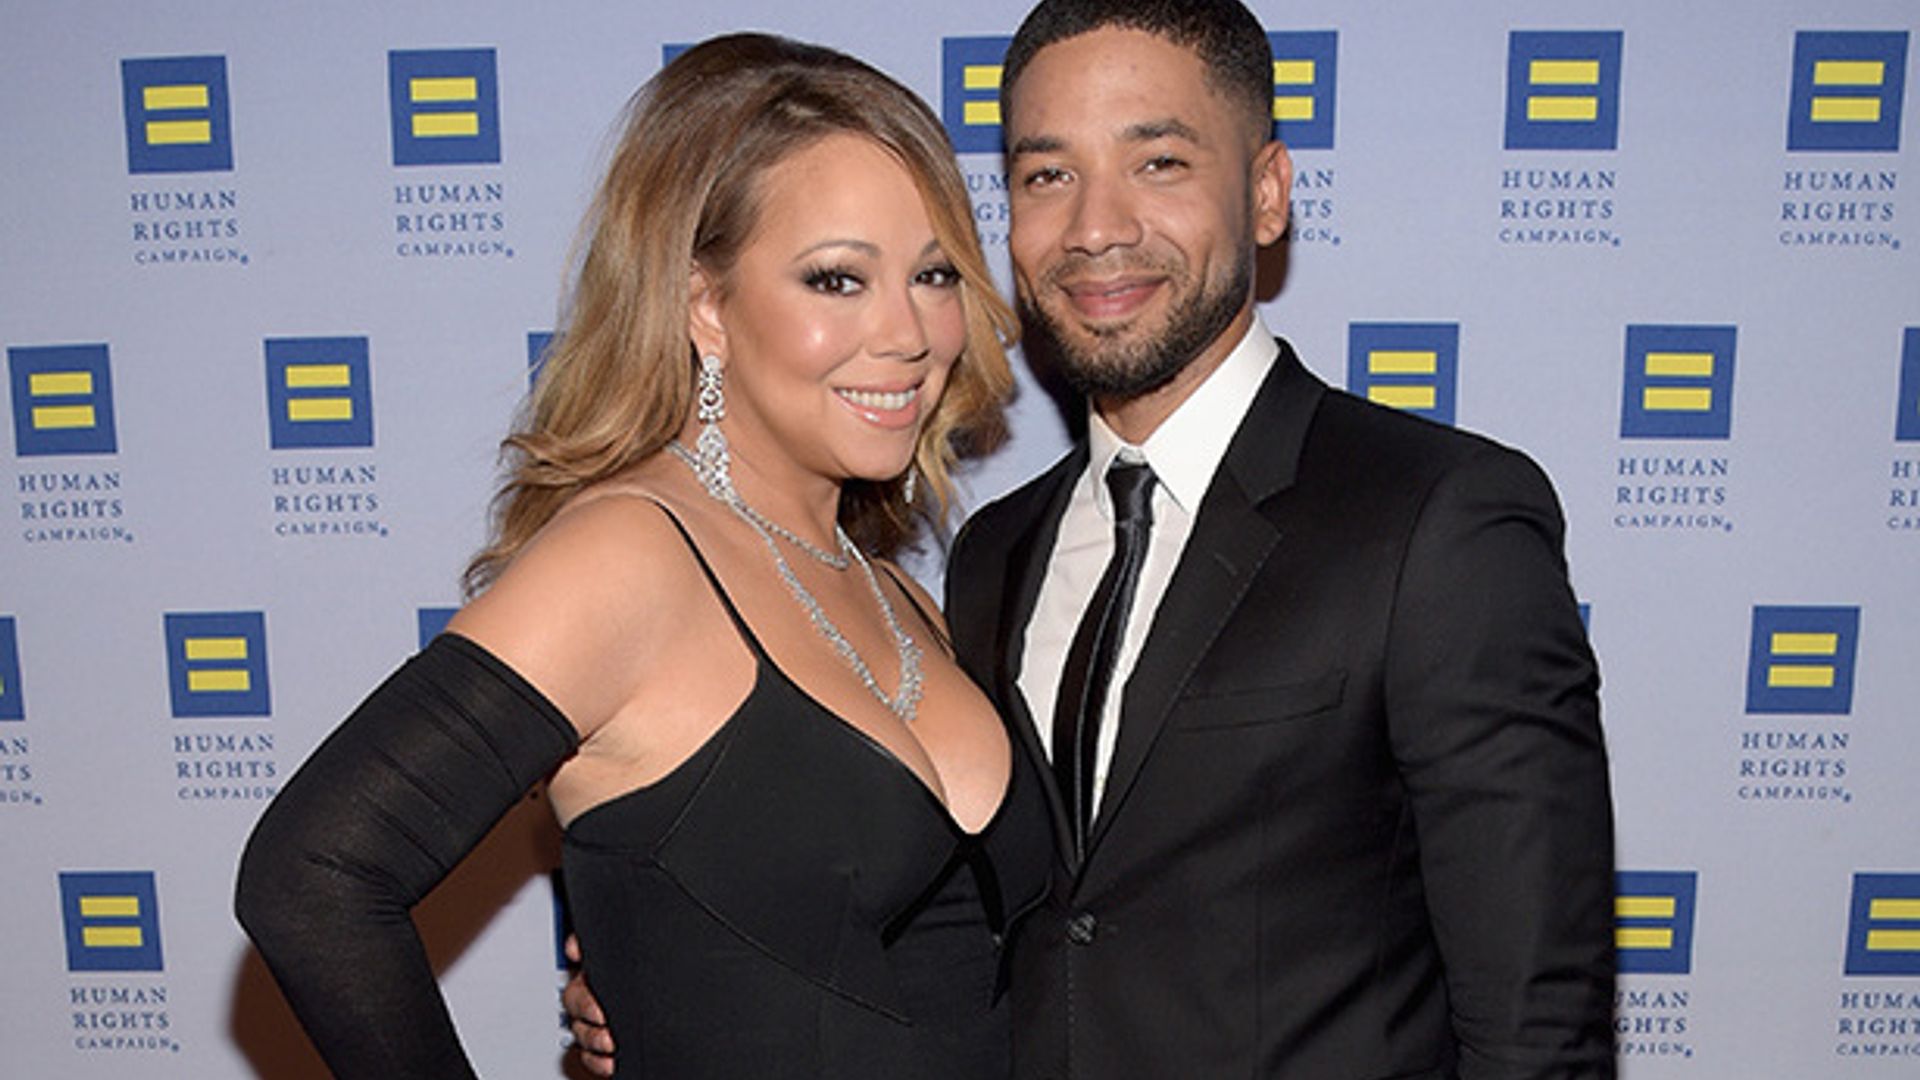 Jussie Smollett gives the scoop on 'diva' Mariah Carey's appearance on 'Empire'